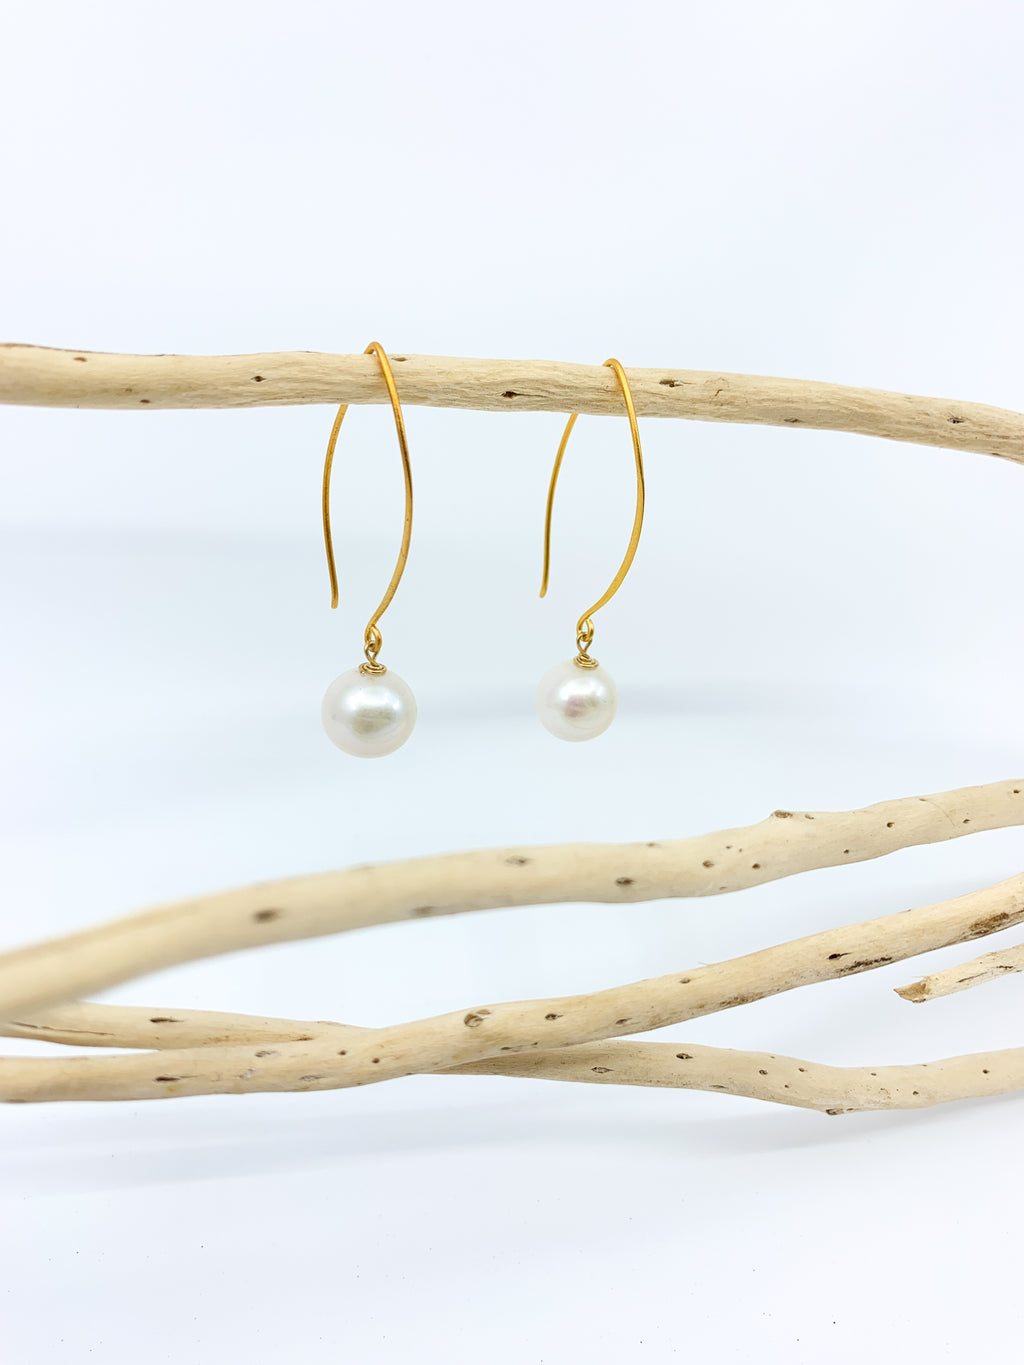 white pearl earrings with long mat gold hook by eve black jewelry made in Hawaii